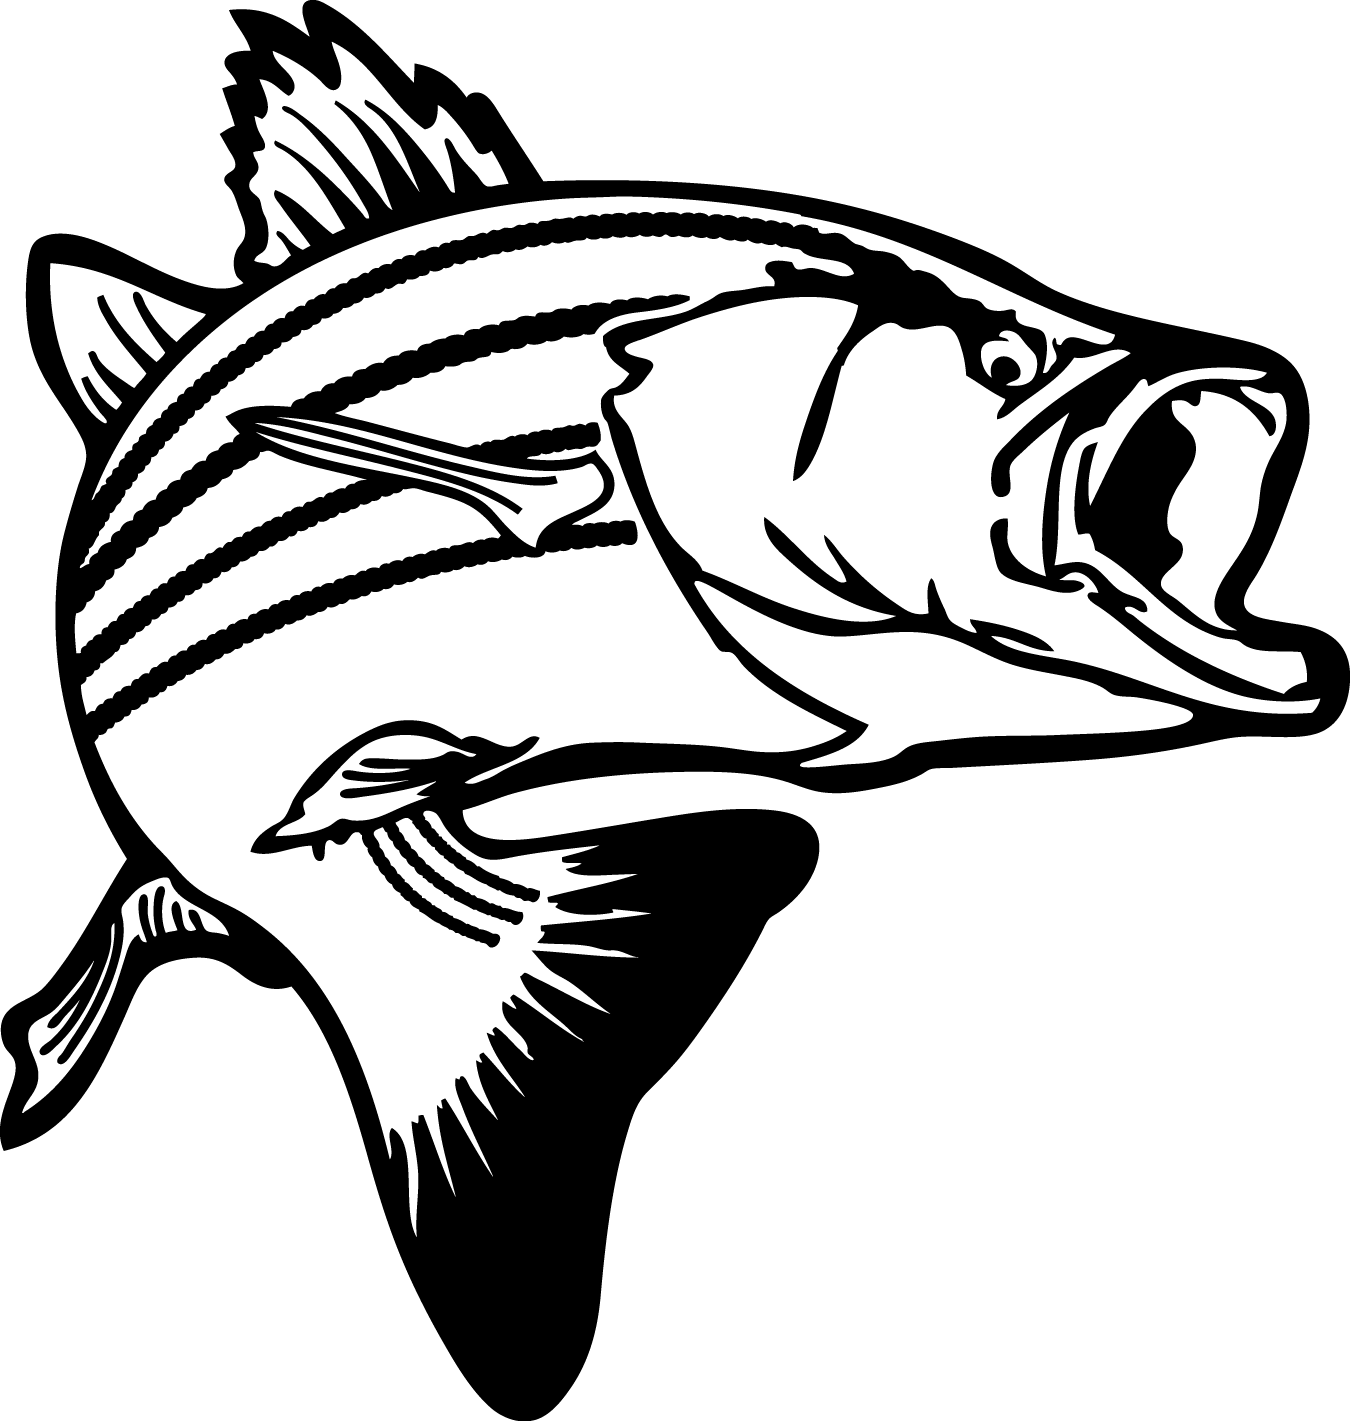 Bass fish with hook in mouth clipart black and white